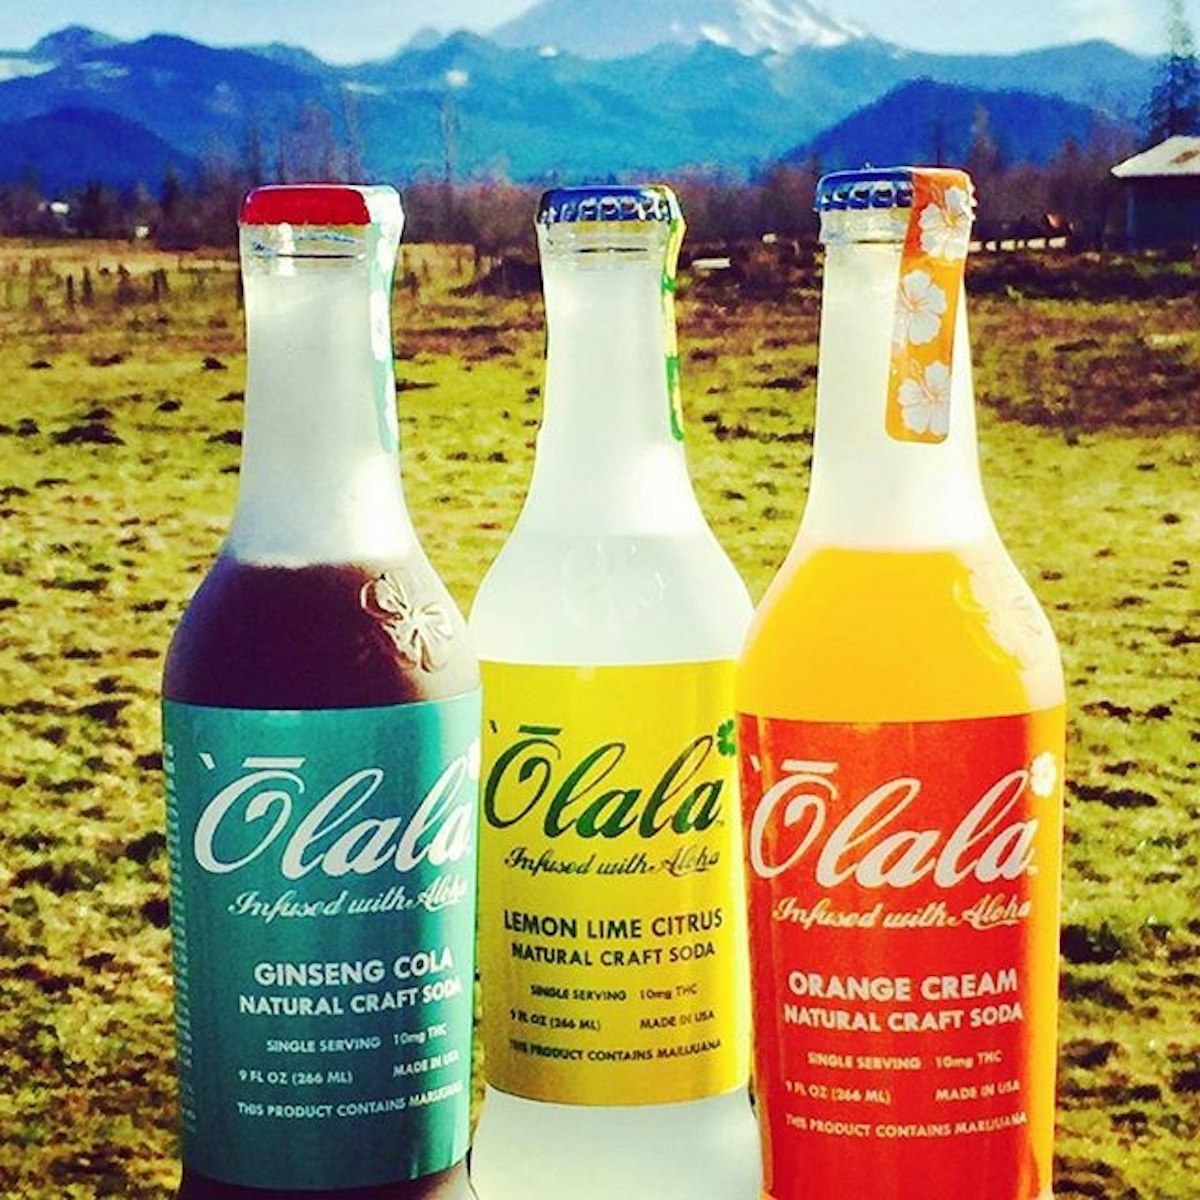 Perfect Union of Cannabis and Fruit: Olala's Amazing Infused Sodas Will  Light Up Your Taste Buds